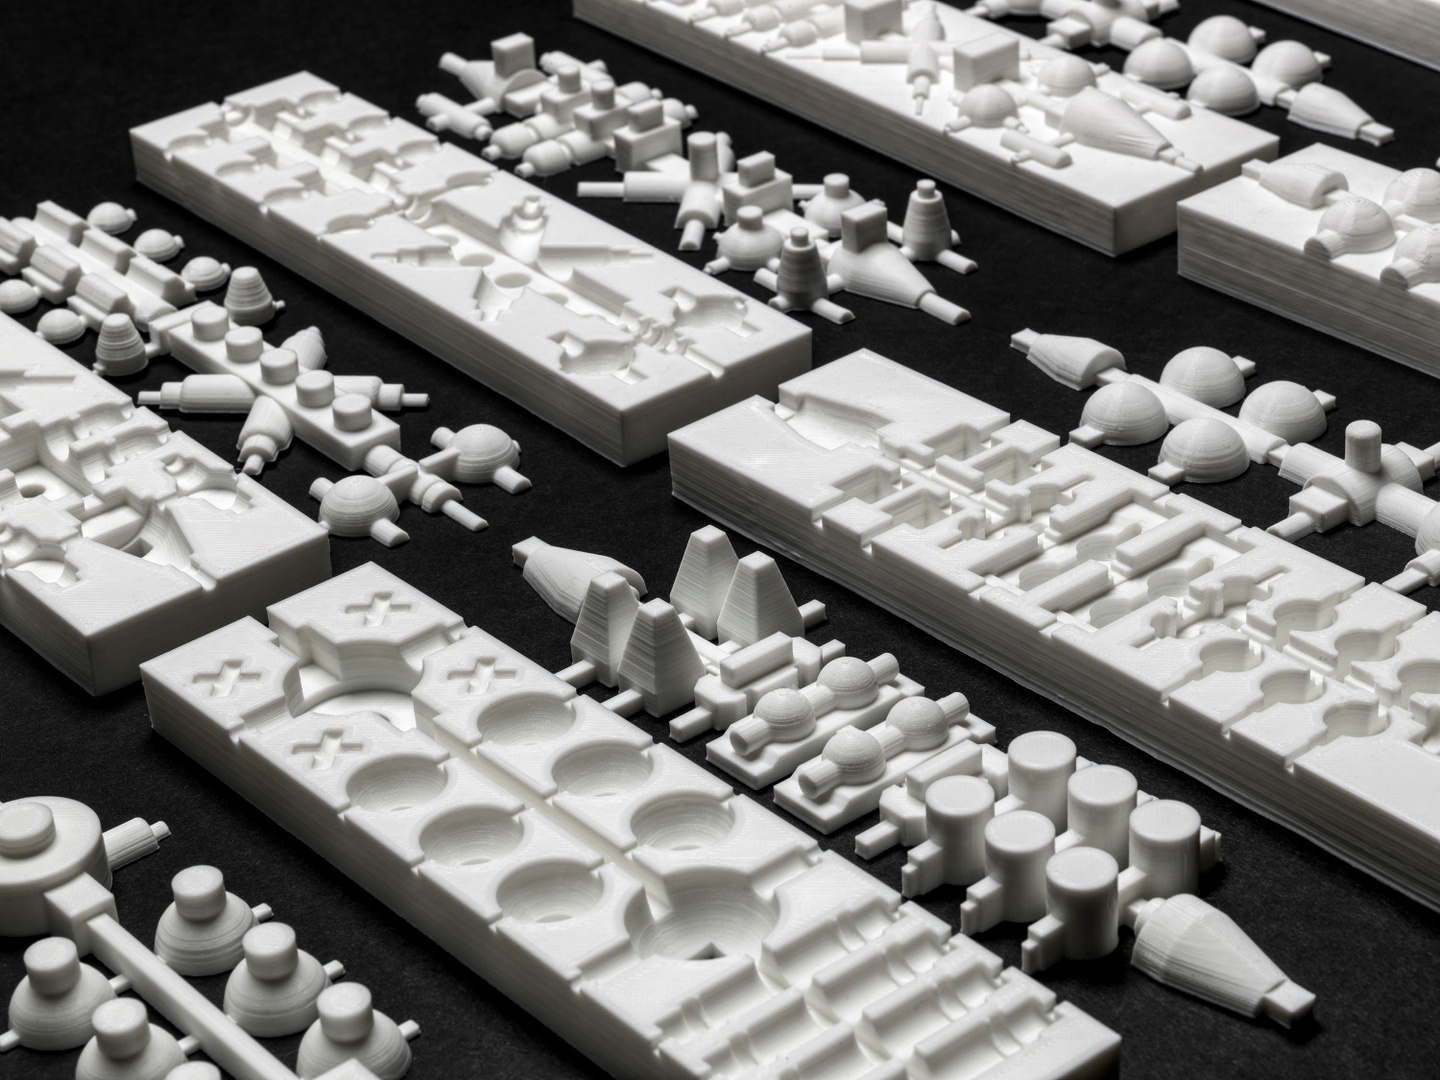 Abstract, white 3D printed objects arranged on a black background